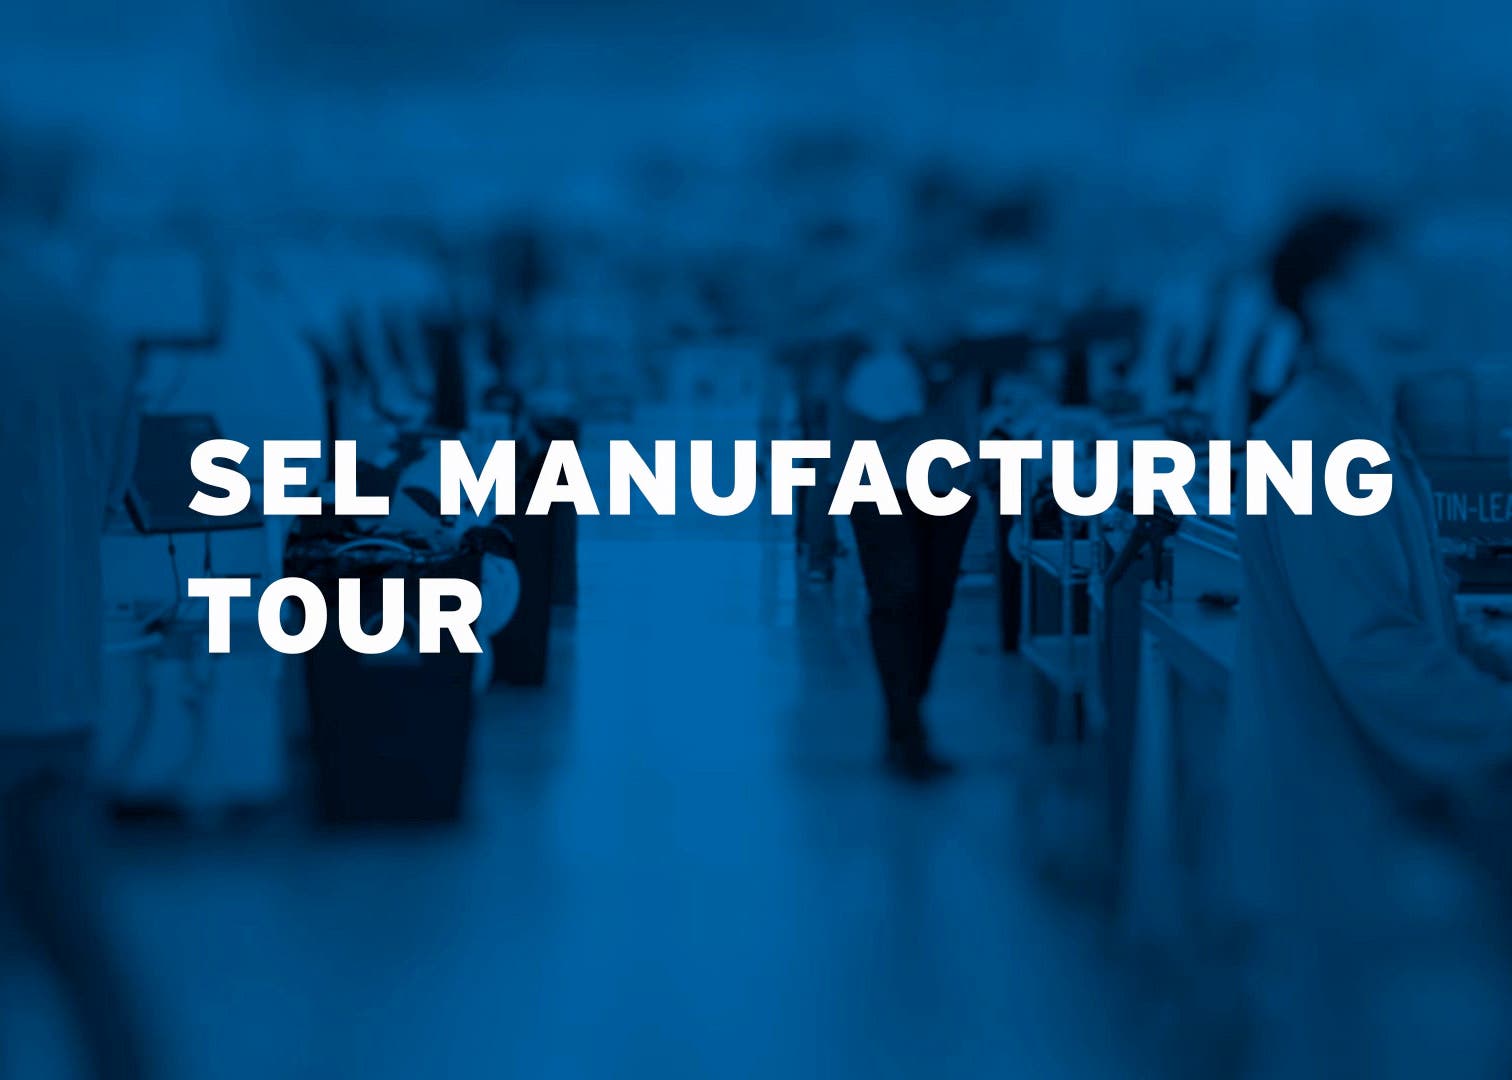 SEL creates virtual manufacturing tour in celebration of Manufacturing Day